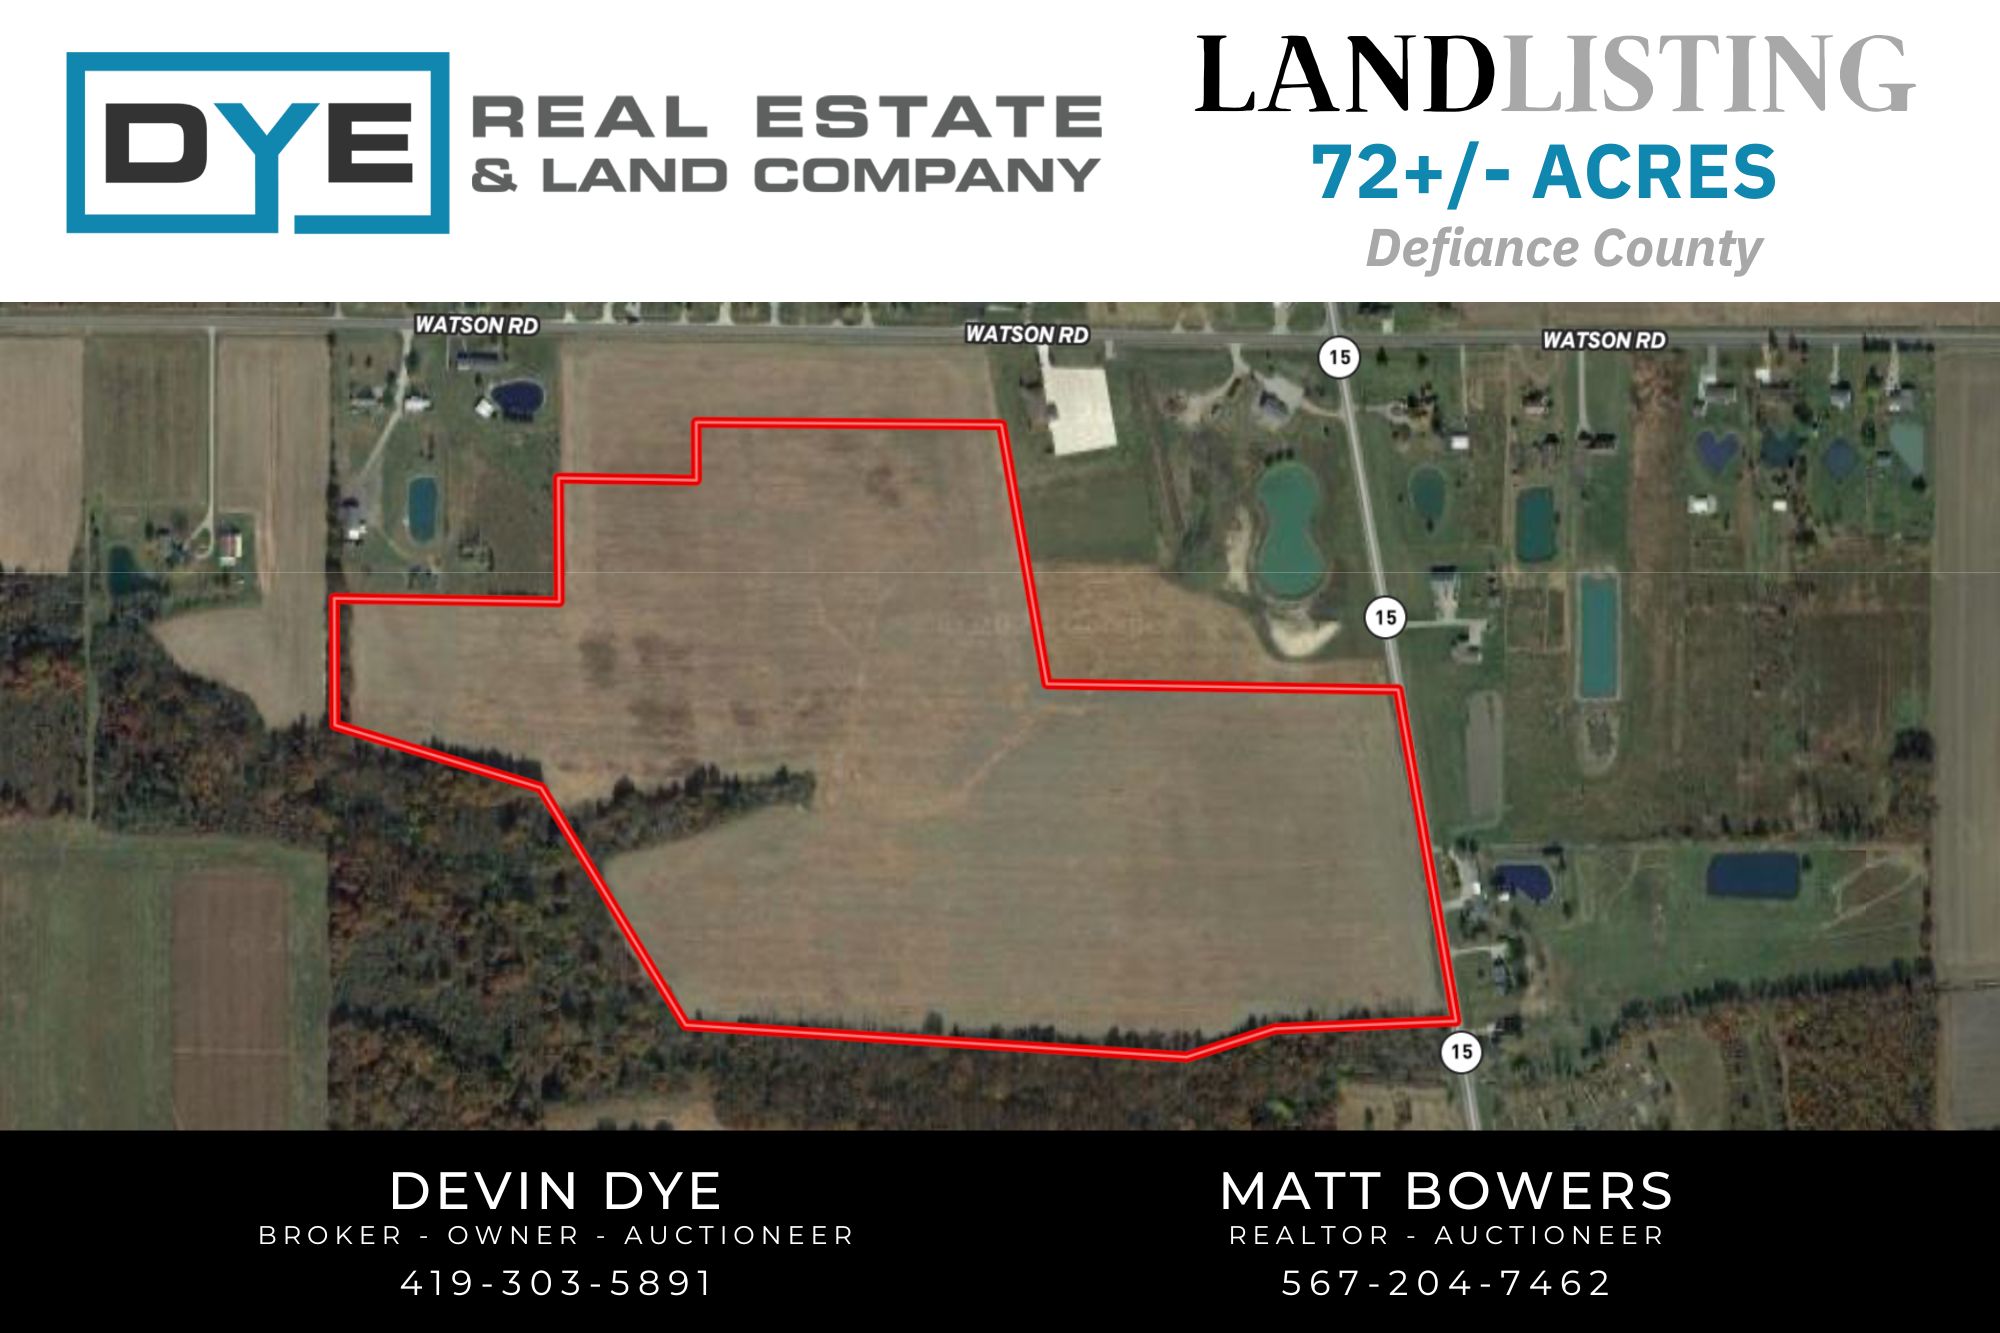 72 +/- Acres - Defiance County